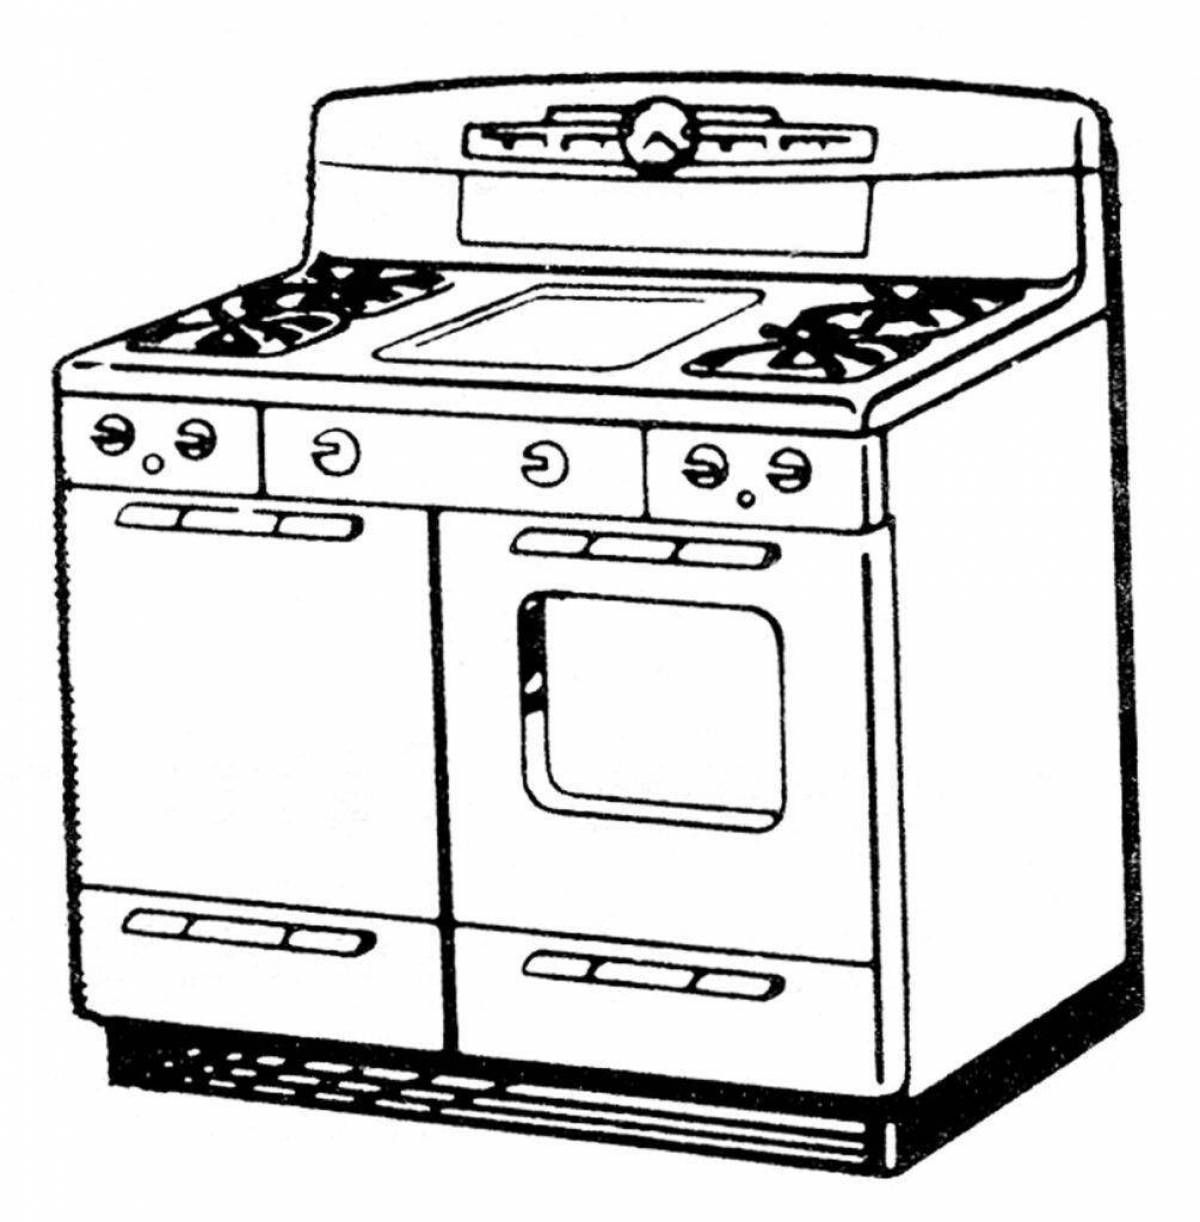 Modern stove coloring page